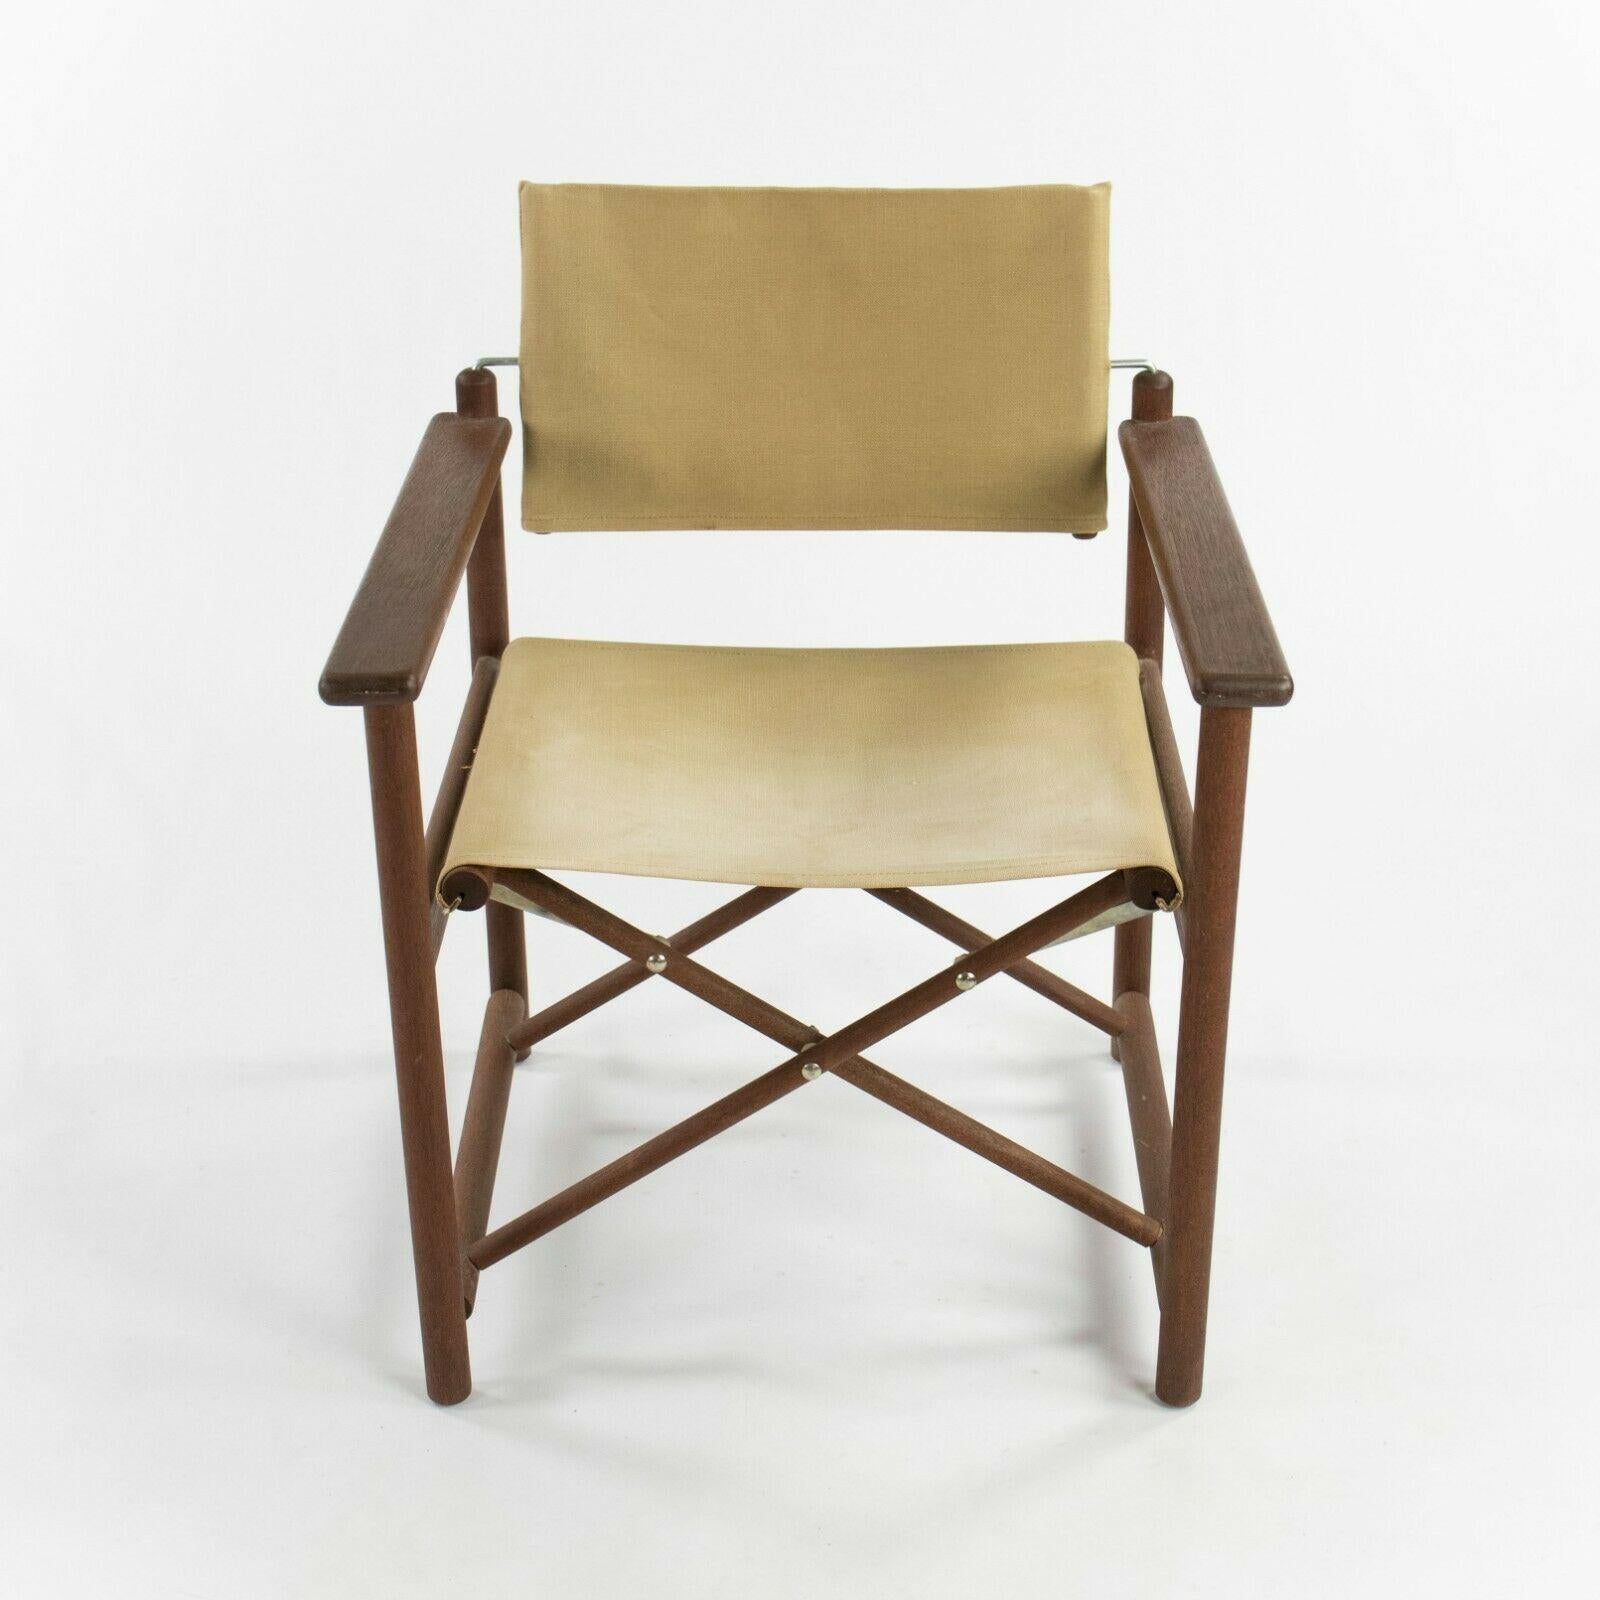 1960s Danish Modern Walnut and Canvas Folding Campaign Chair For Sale 1